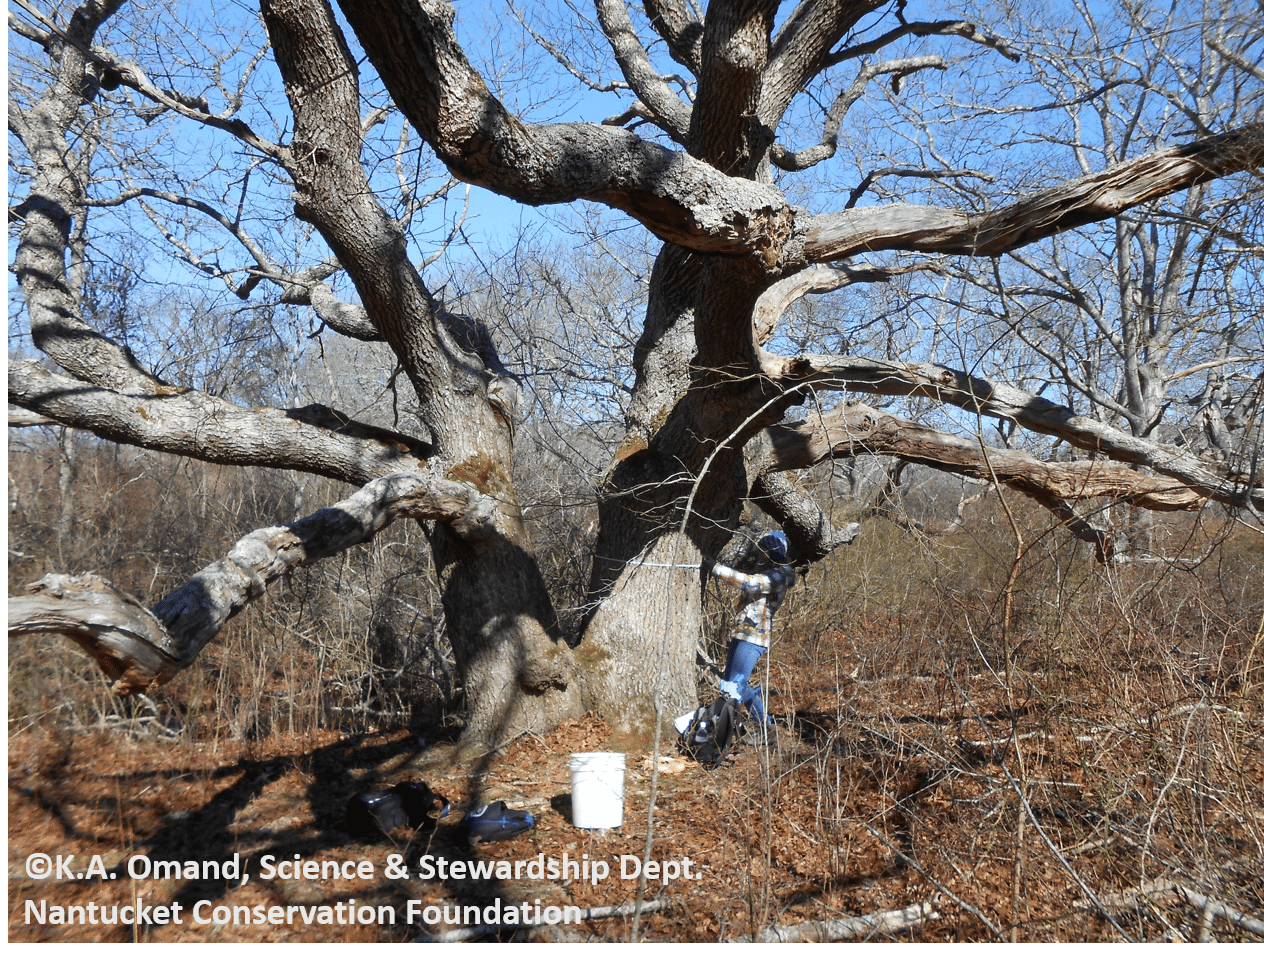 One of the large black oak (Quercus velutina) trees at Squam Swamp, being measured by student Zannie Duffy.